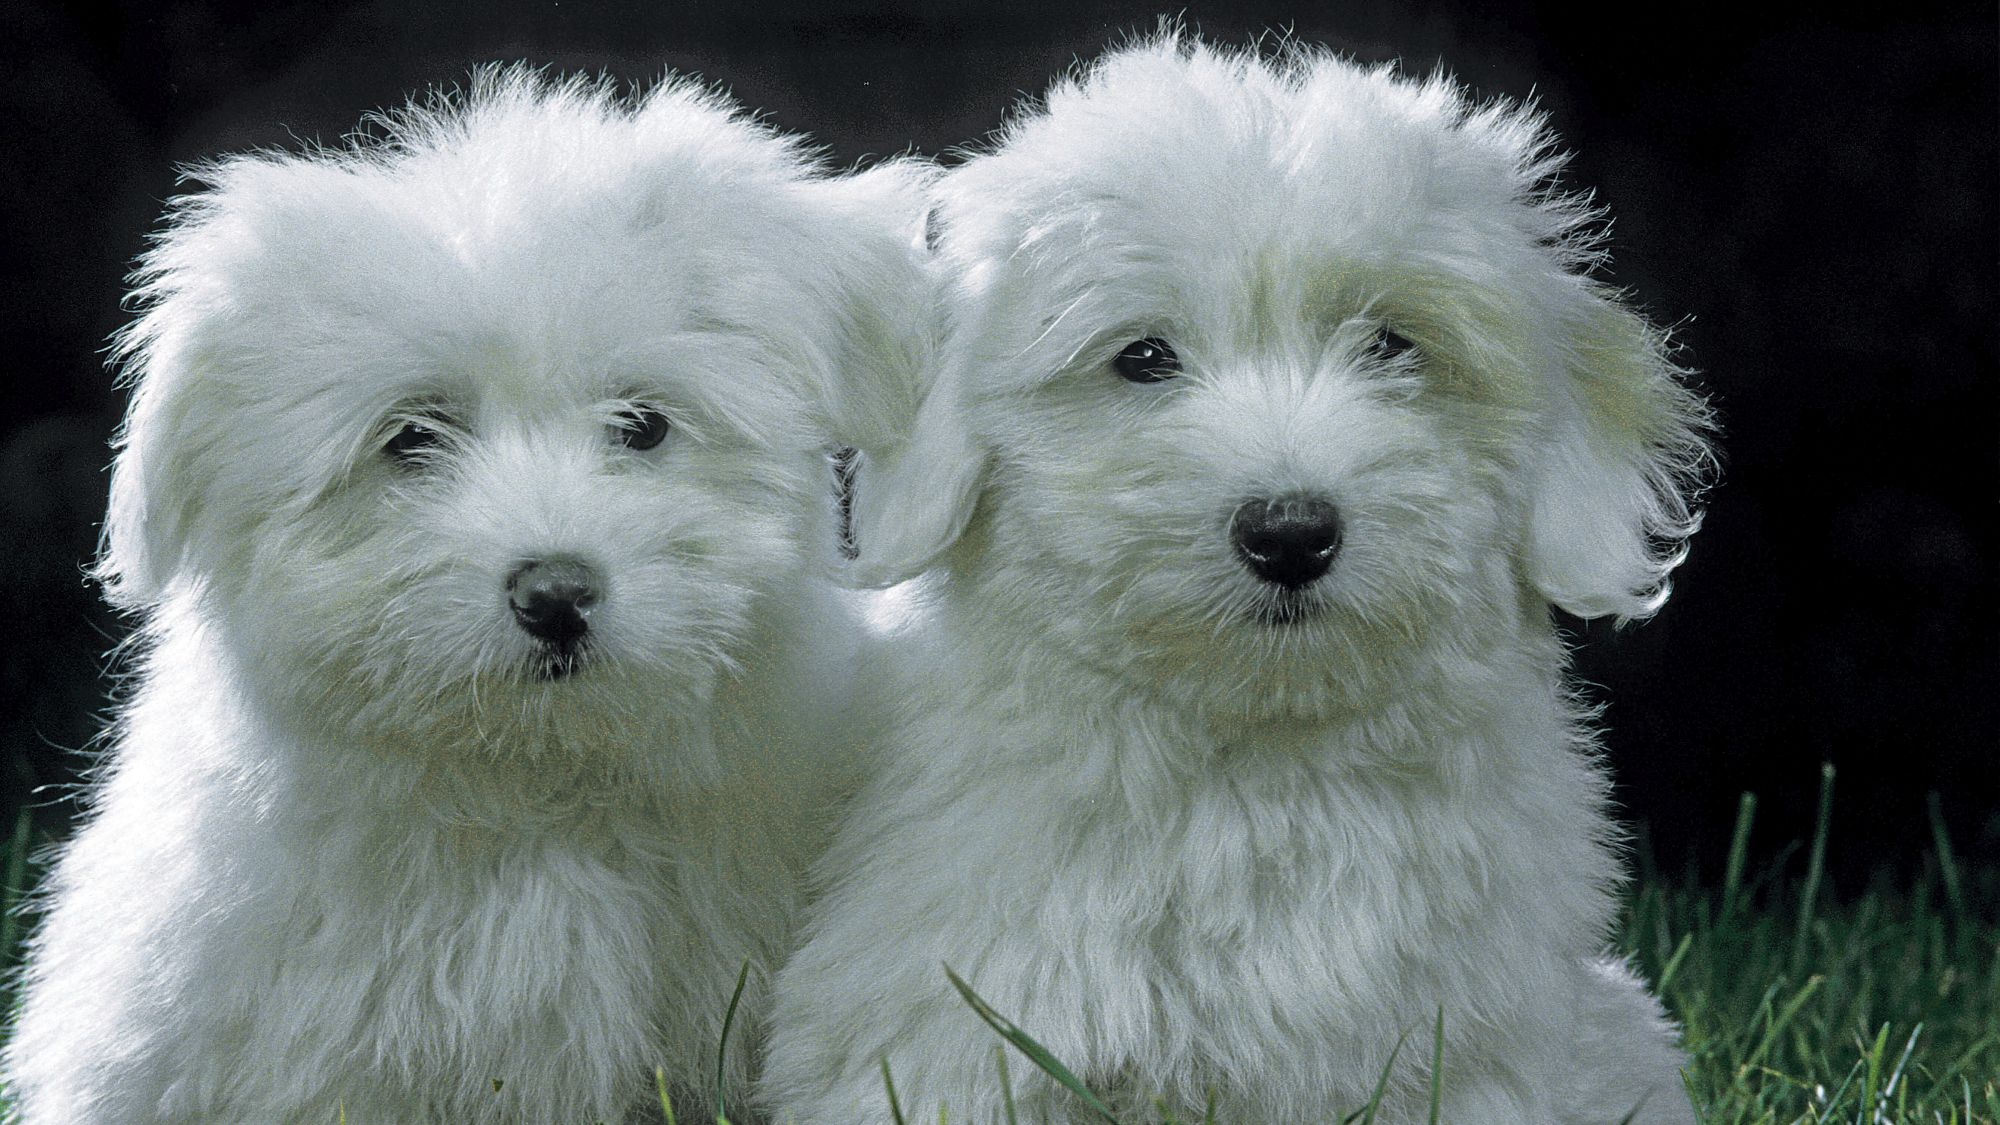 Two Coton de Tulear puppies sat side by side on grass